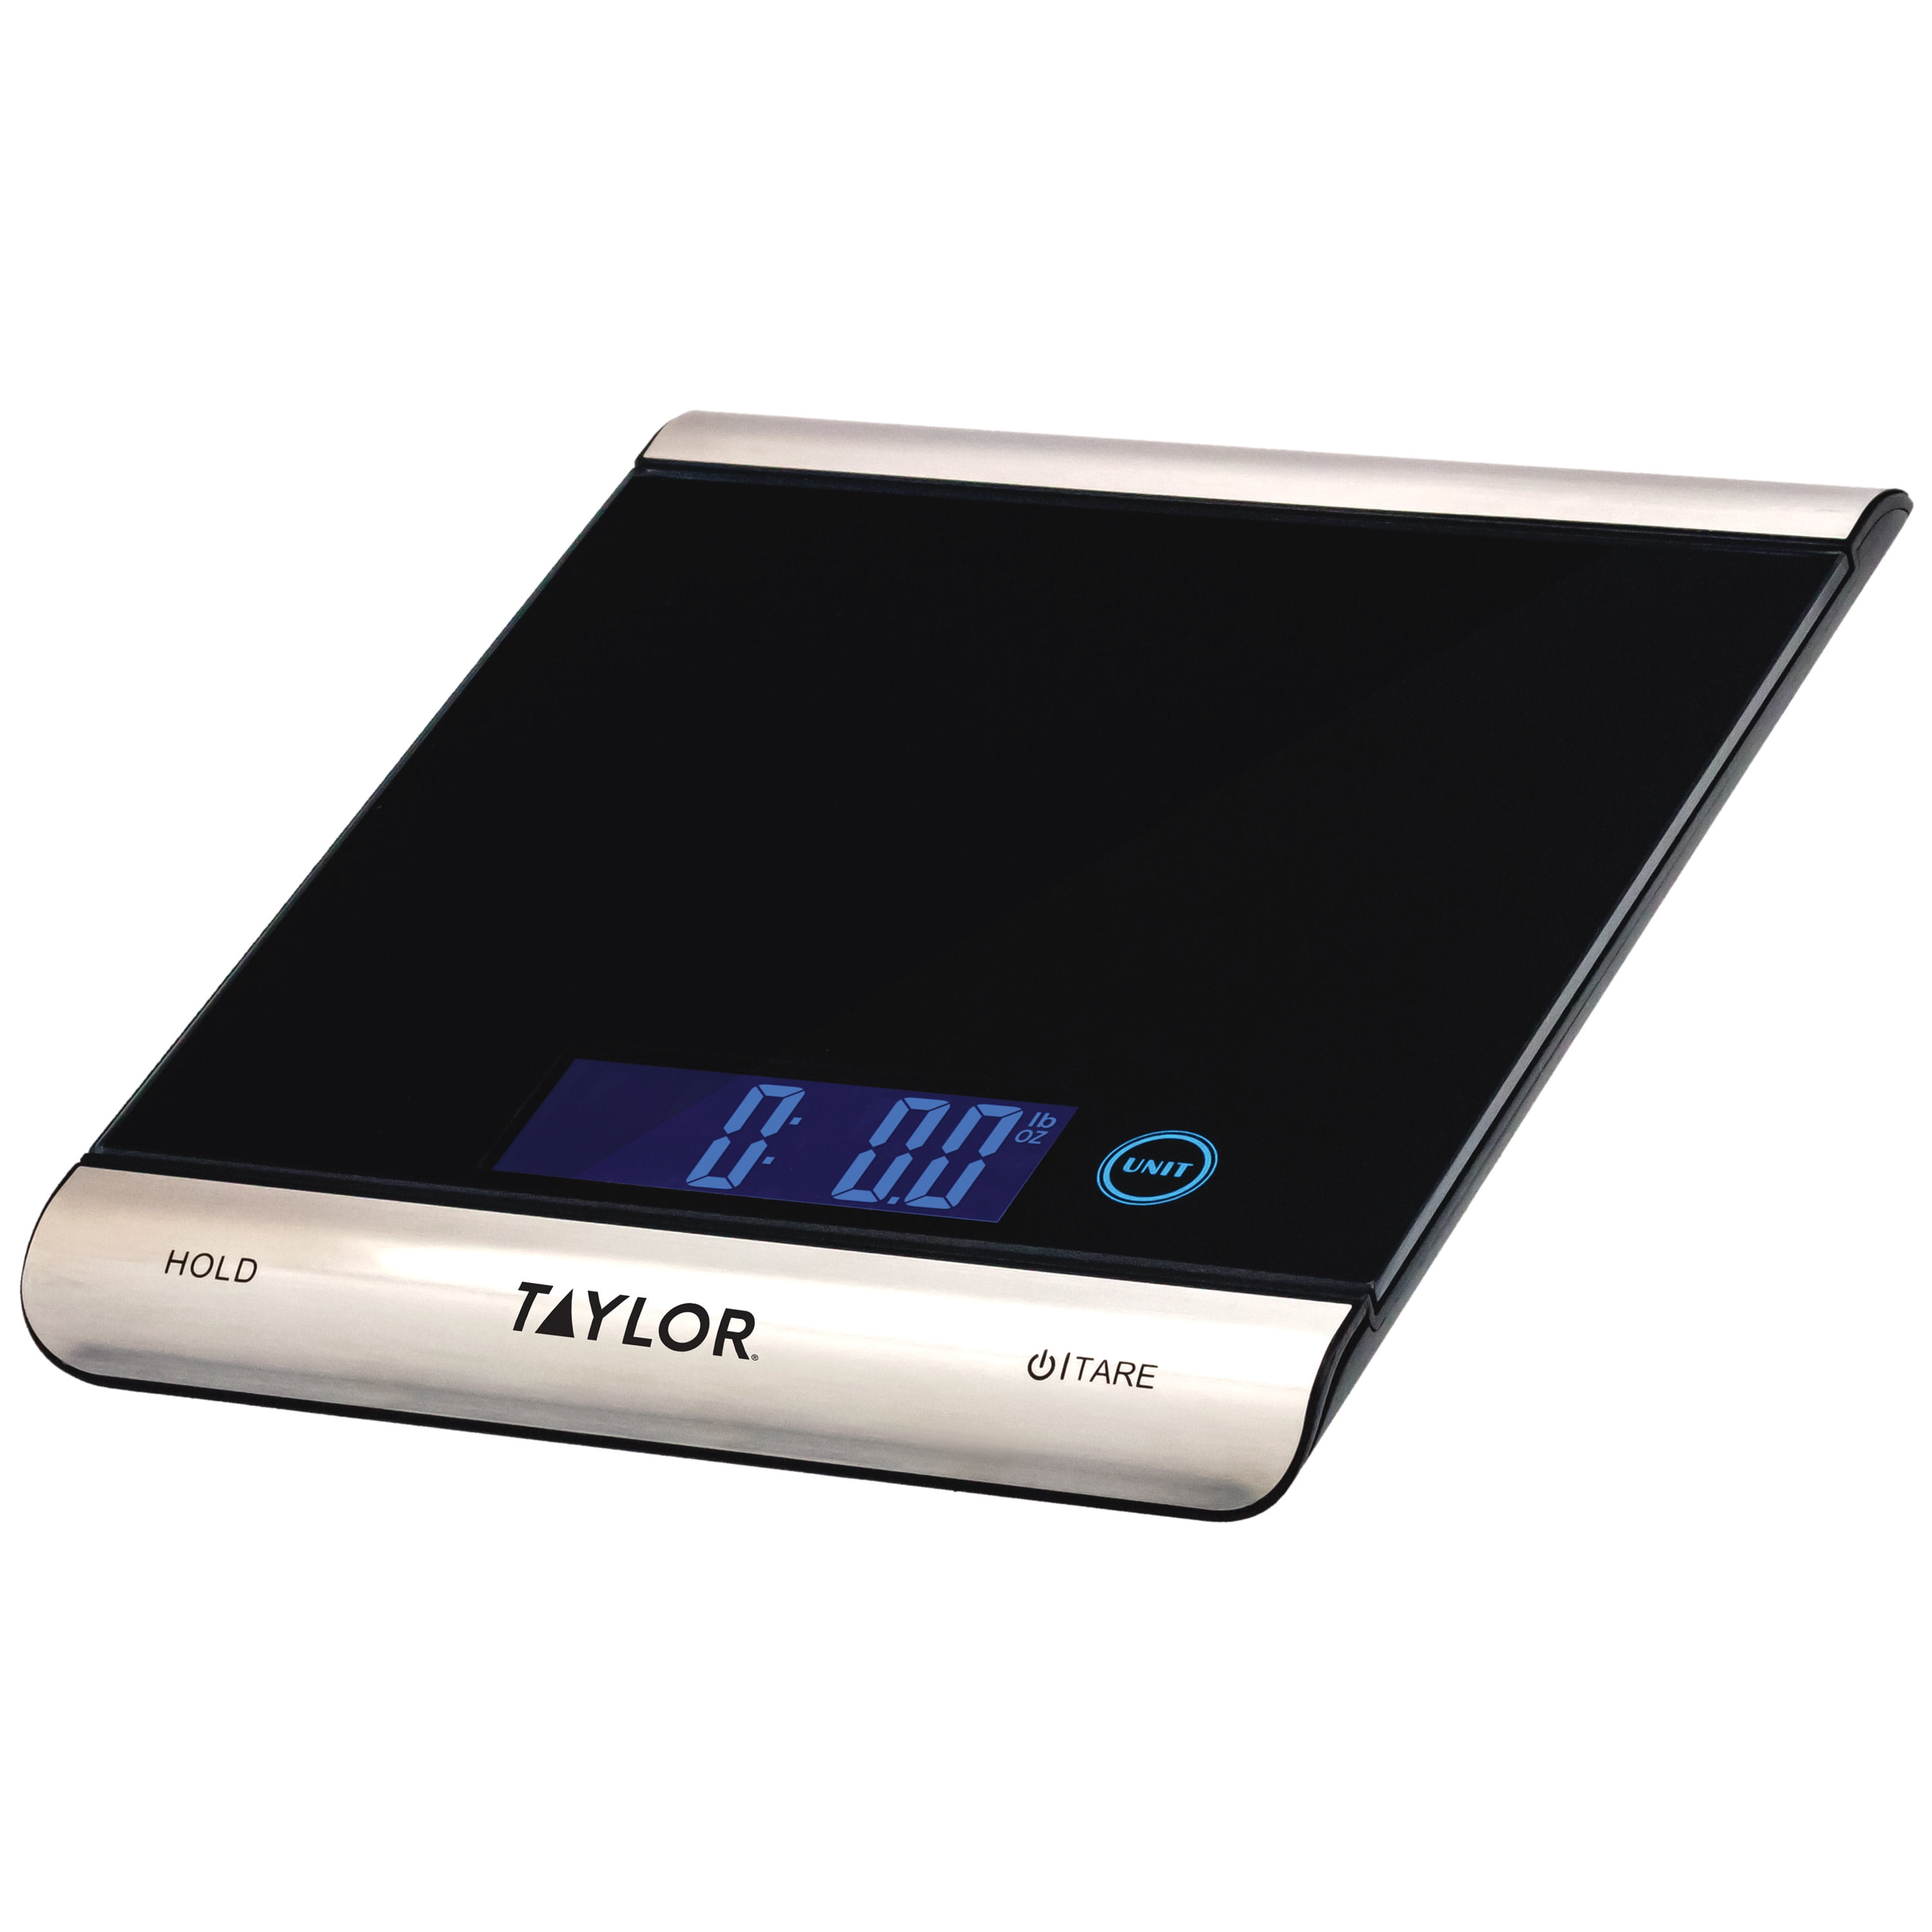 Brod & Taylor High-Capacity Digital Kitchen Scale